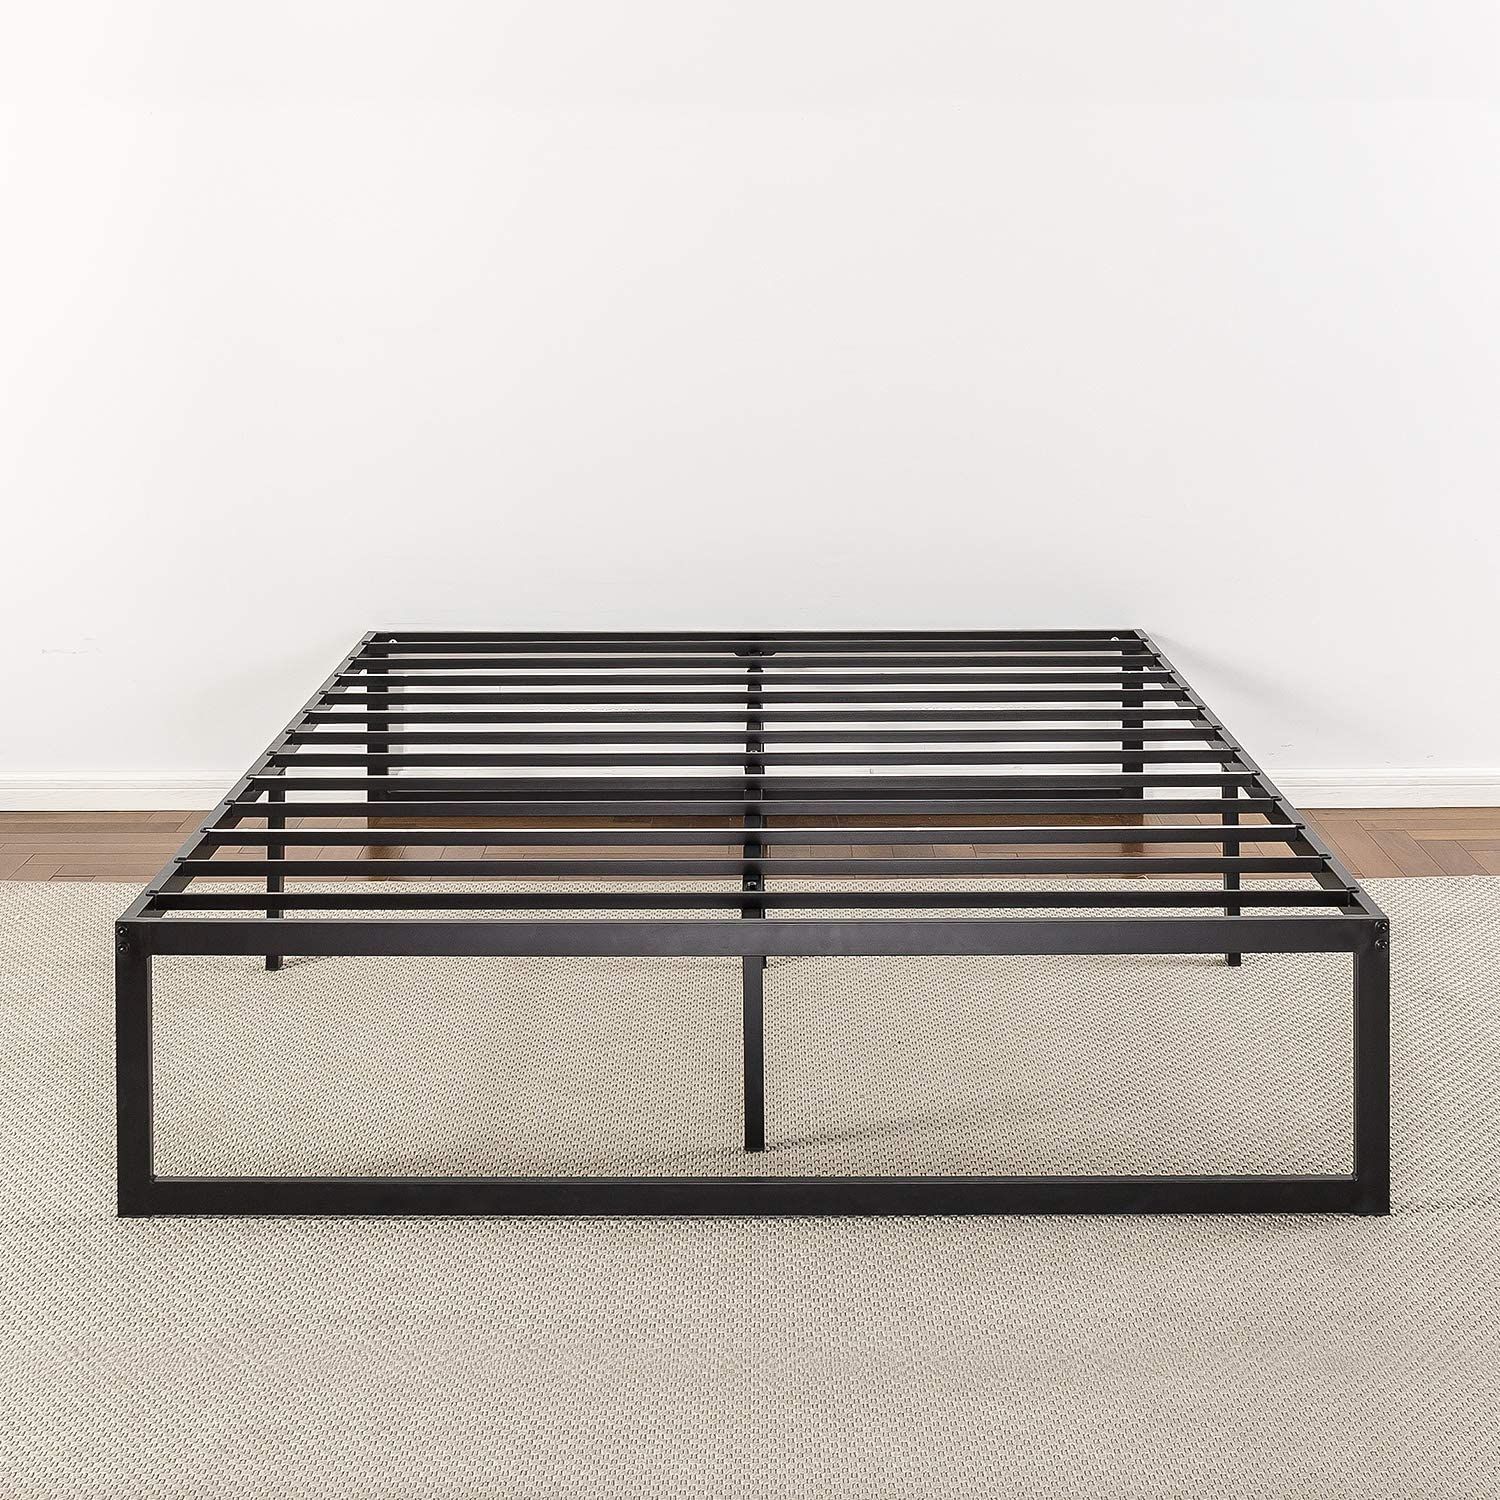 19 Best Metal Bed Frames 2022 The, How To Add Slats A Metal Bed Frame